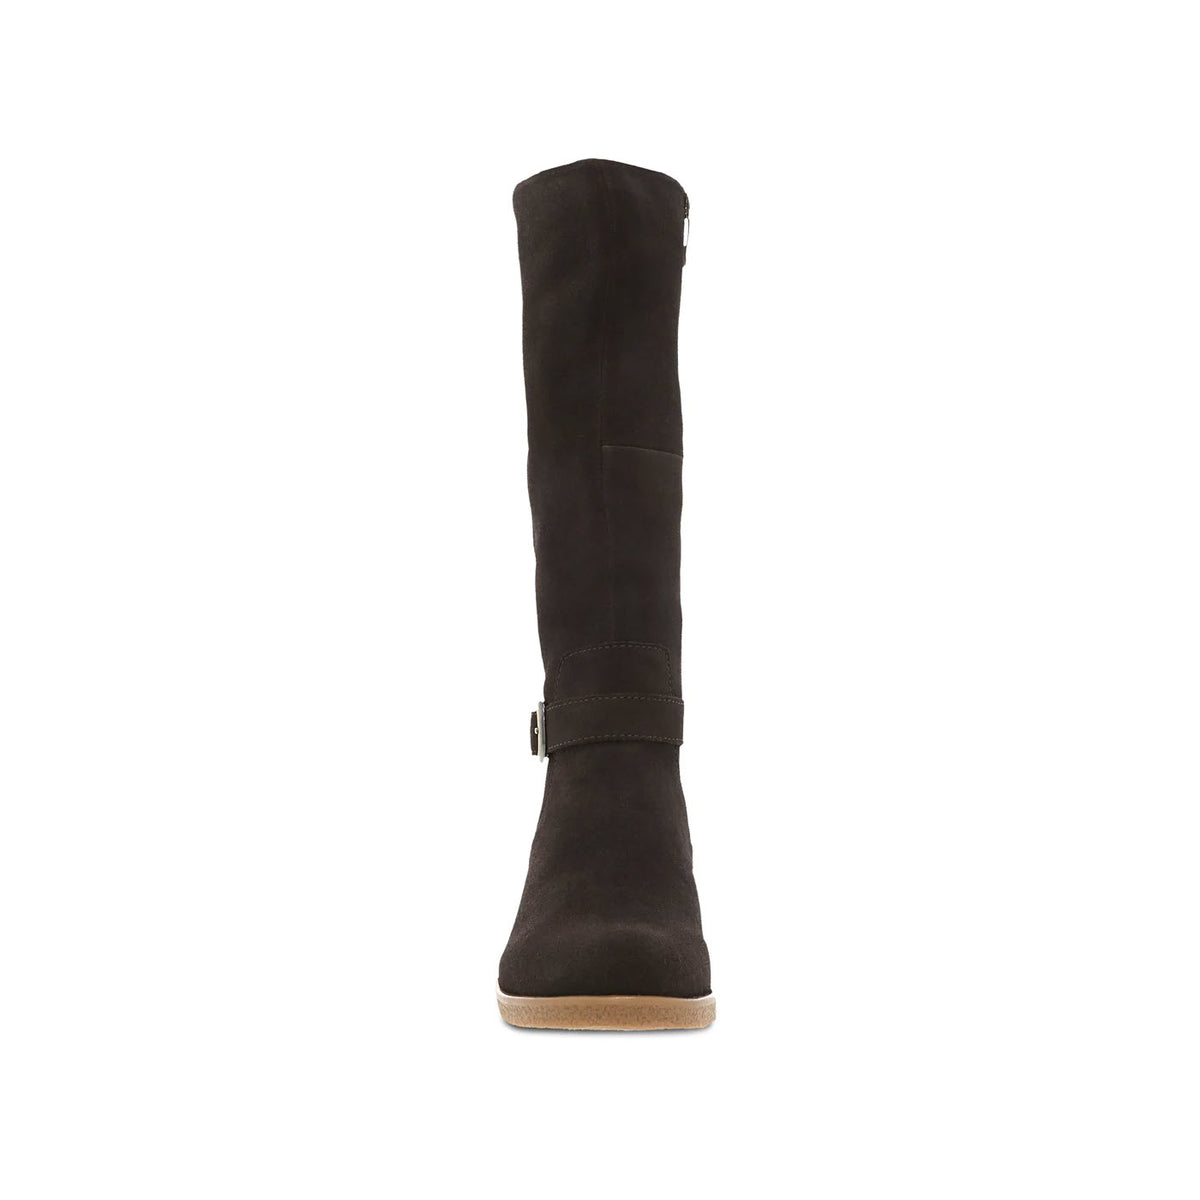 Side view of a tall black Dansko Dalinda Chocolate Suede boot with a small buckle on the ankle and a flat sole, isolated on a white background.